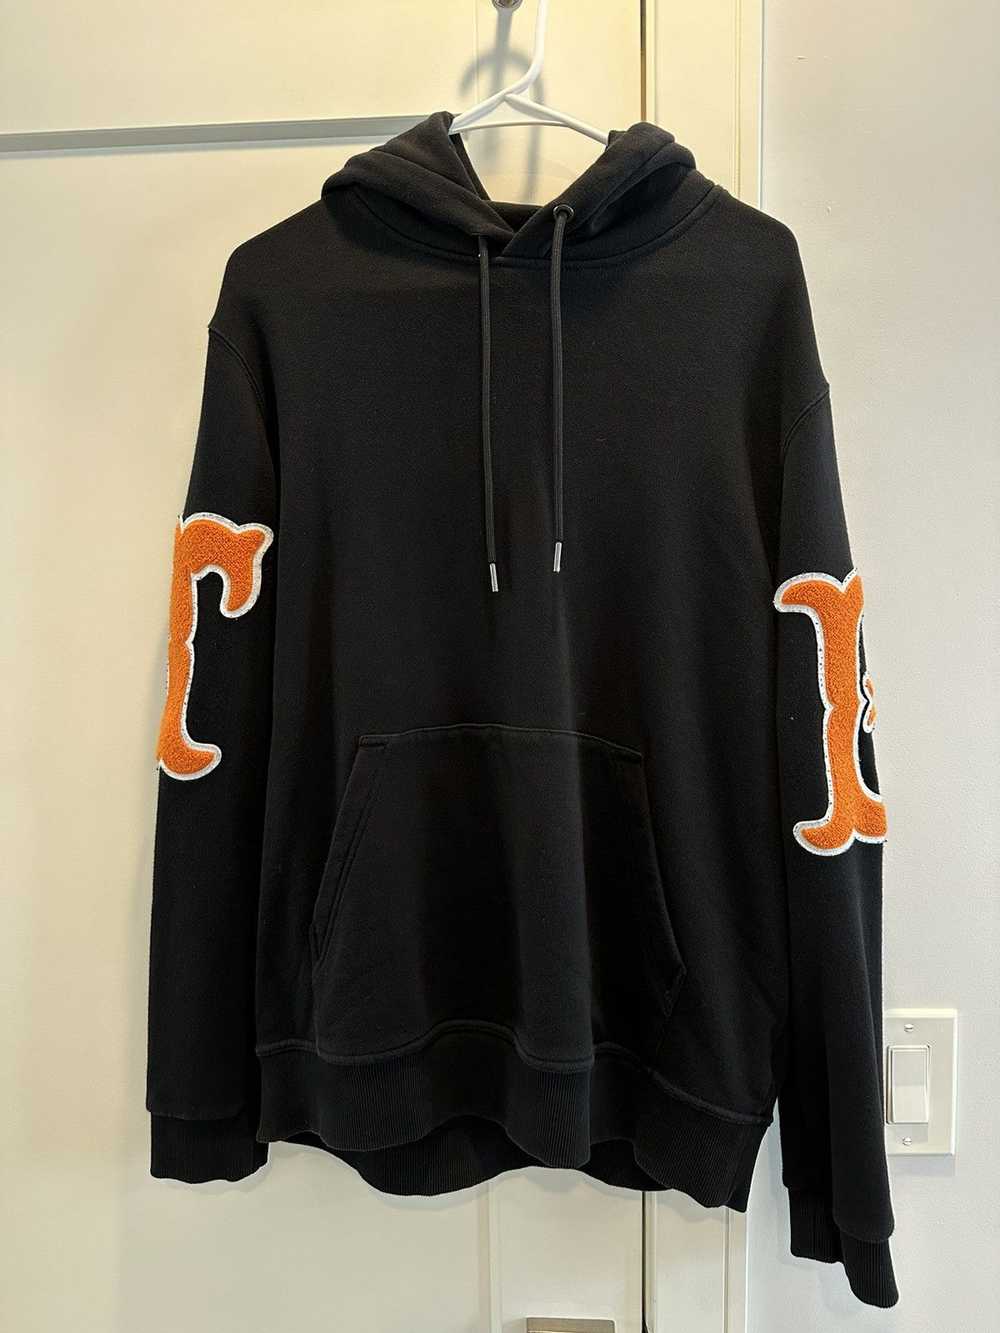 Burberry Burberry Letter Graphic Hoodie - image 1